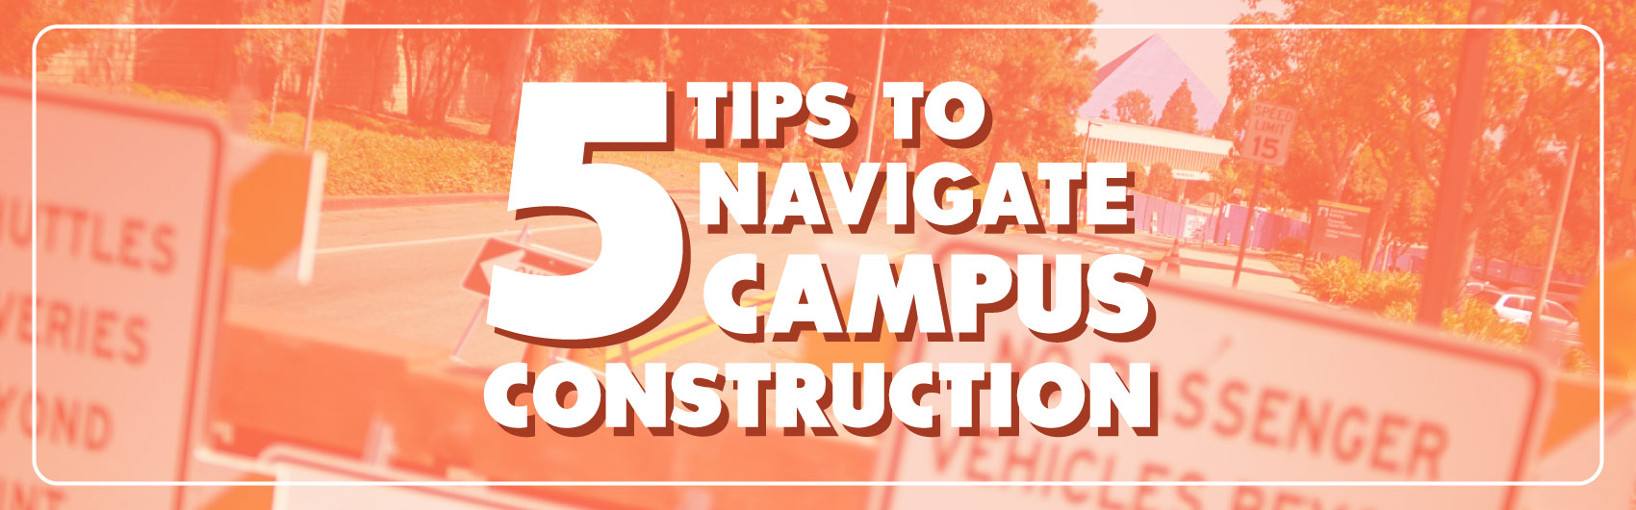 5 Tips for Navigating Campus Construction banner